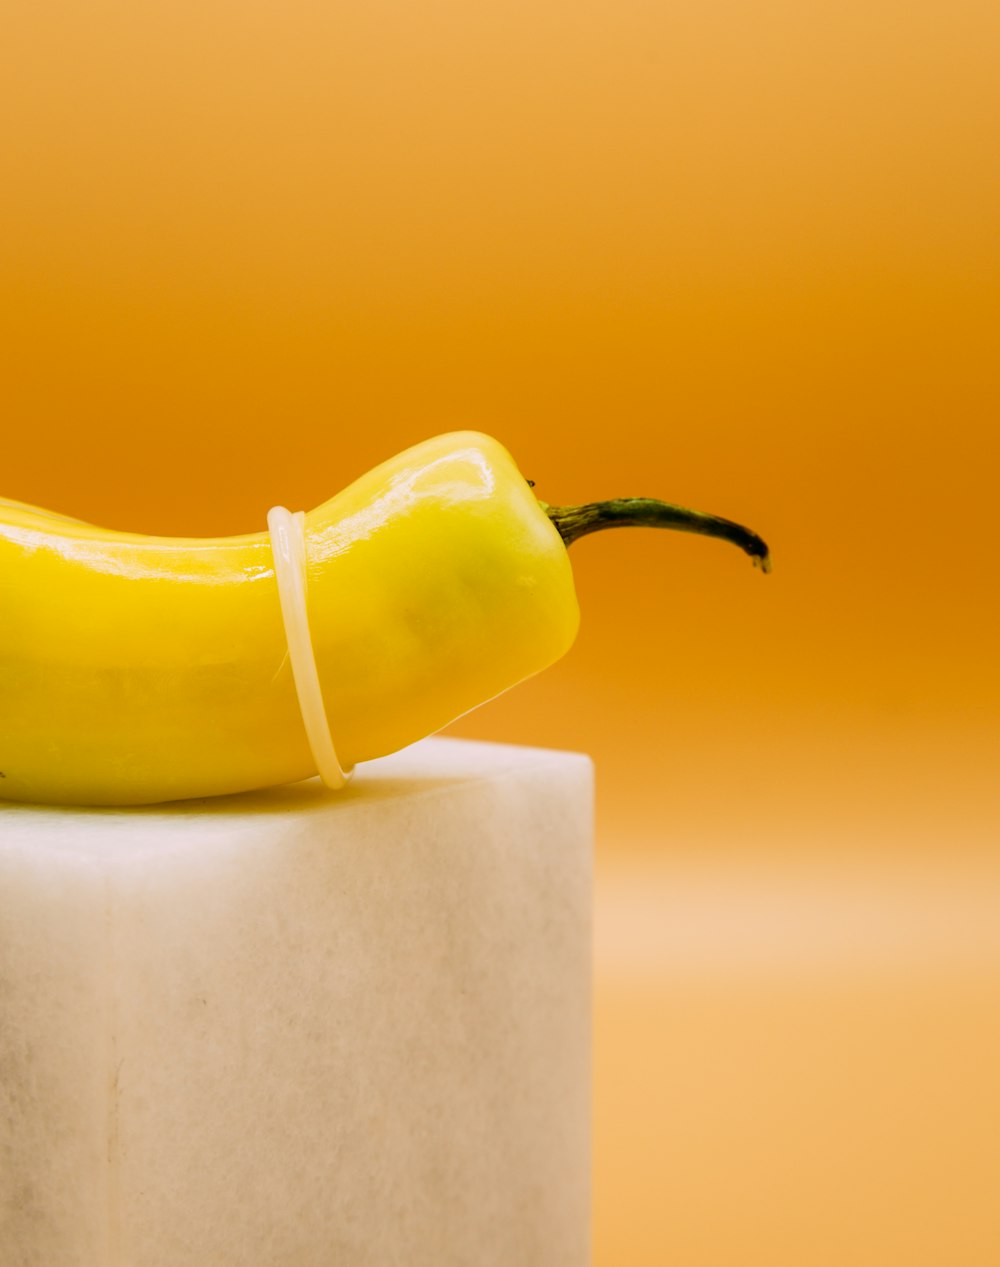 yellow bell pepper on white paper